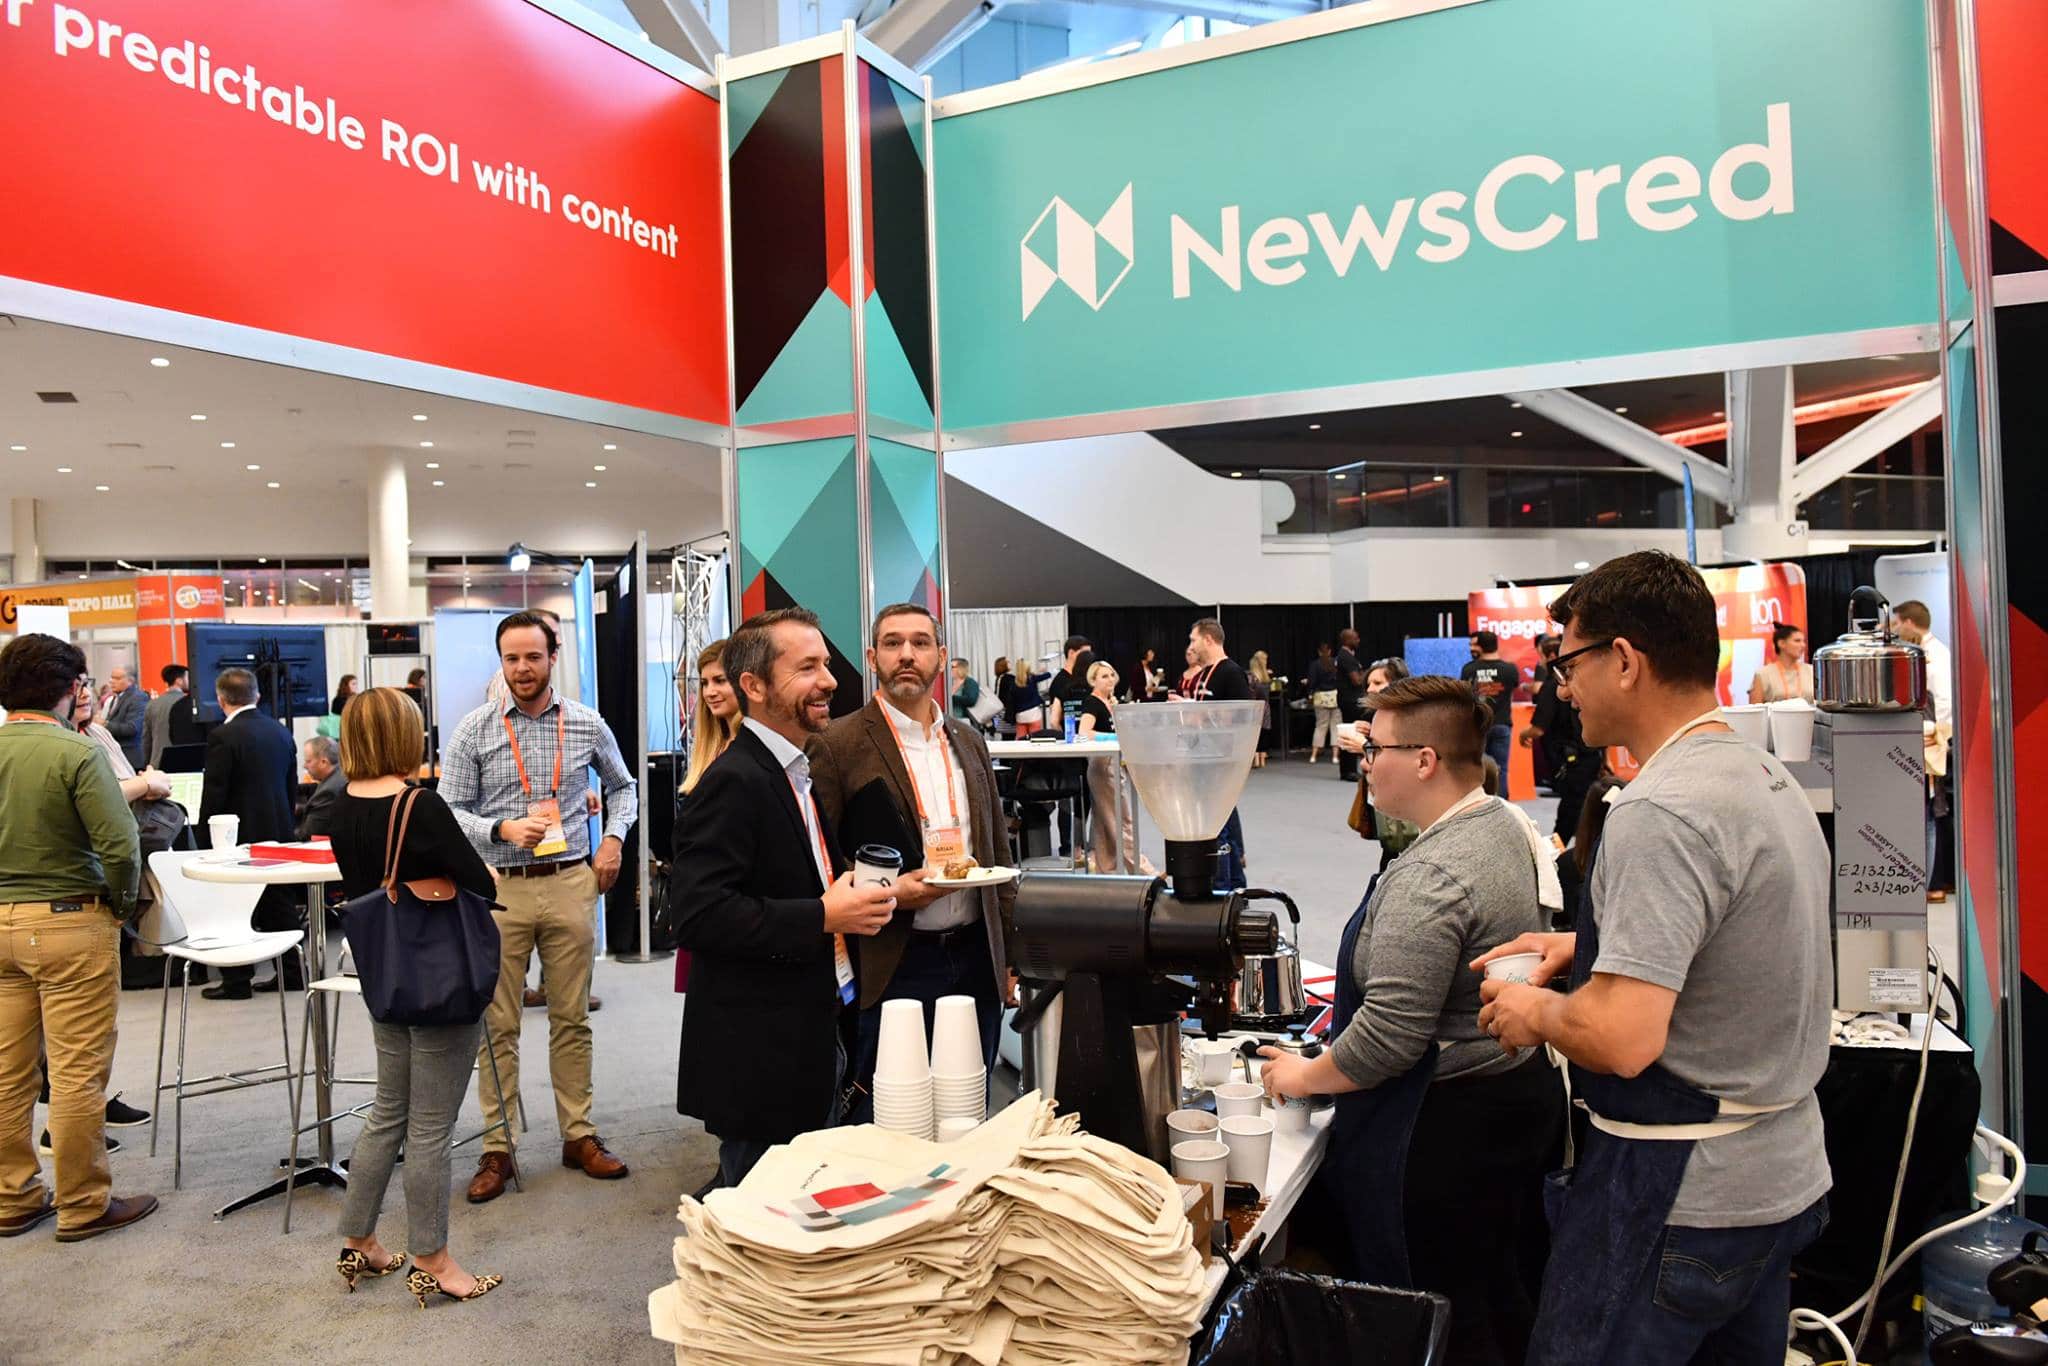 Email marketers network and socialize at Content Marketing World.